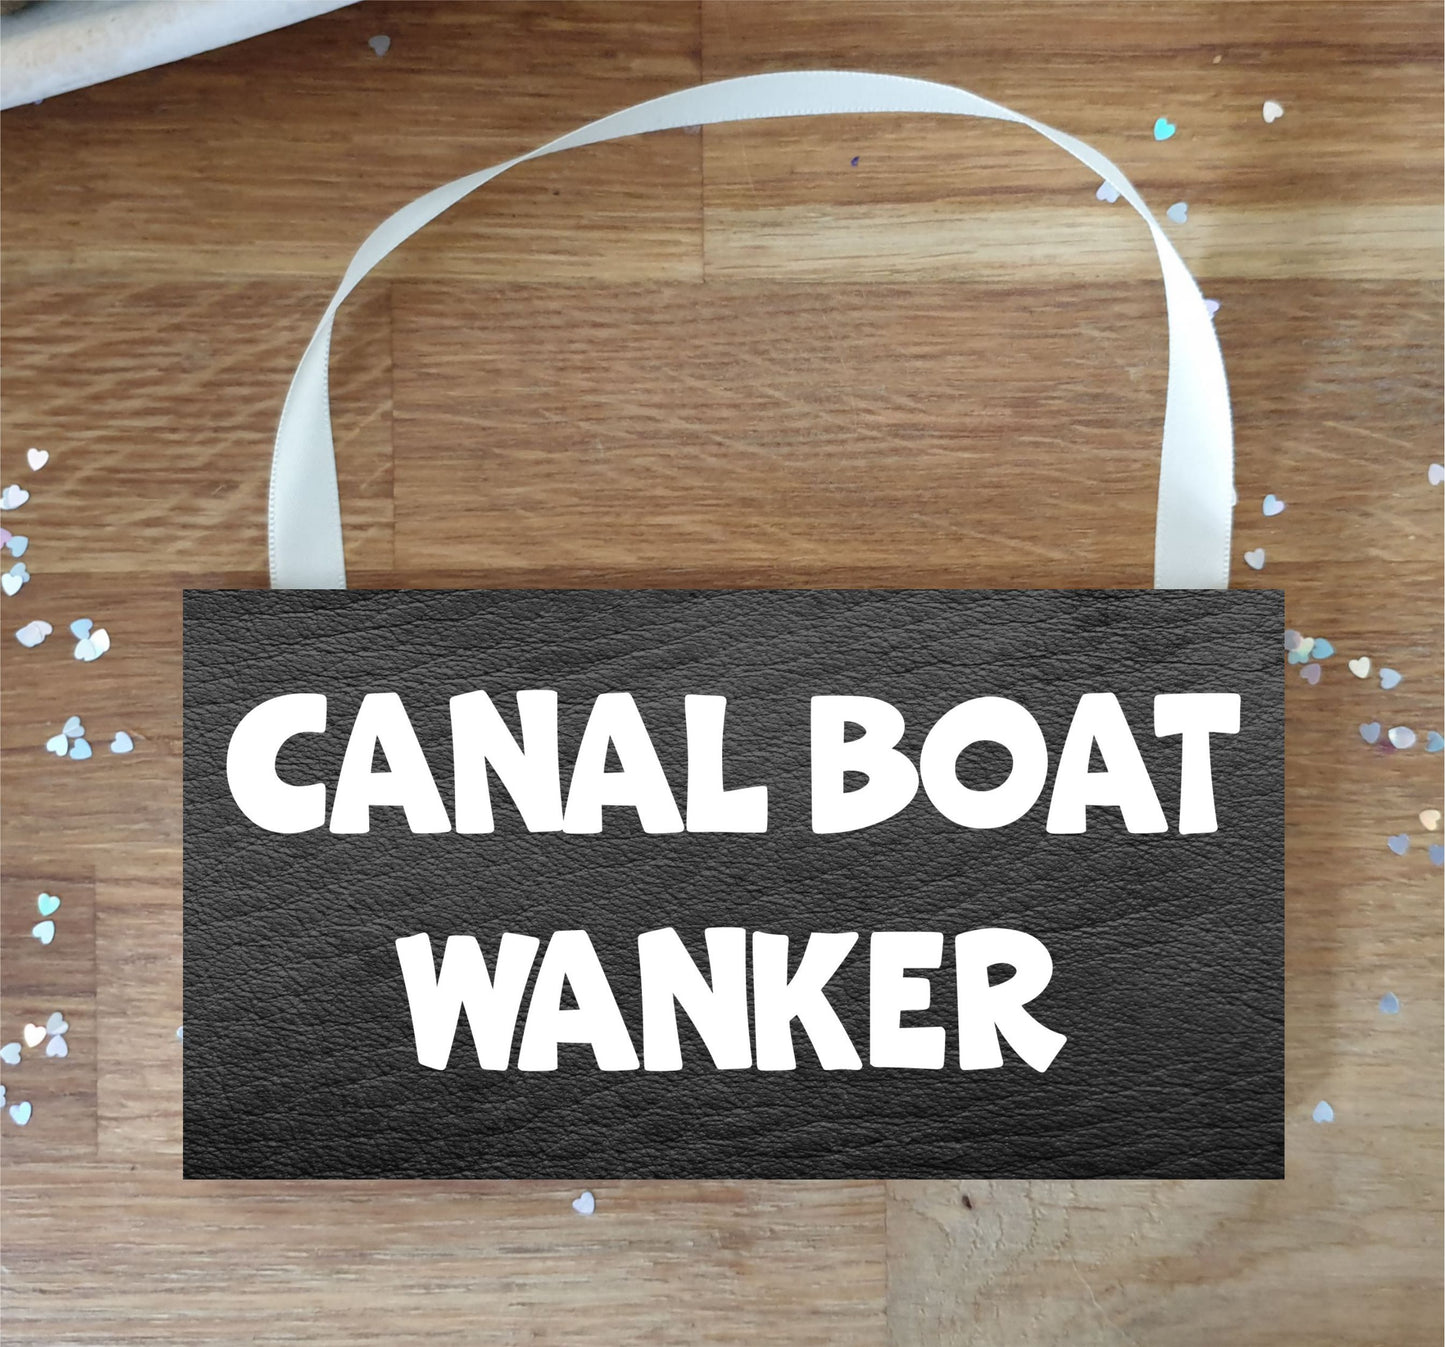 Boating Plaque / Sign Gift - Canal Boat Wanker - Rude Cheeky Cute Fun Novelty Present